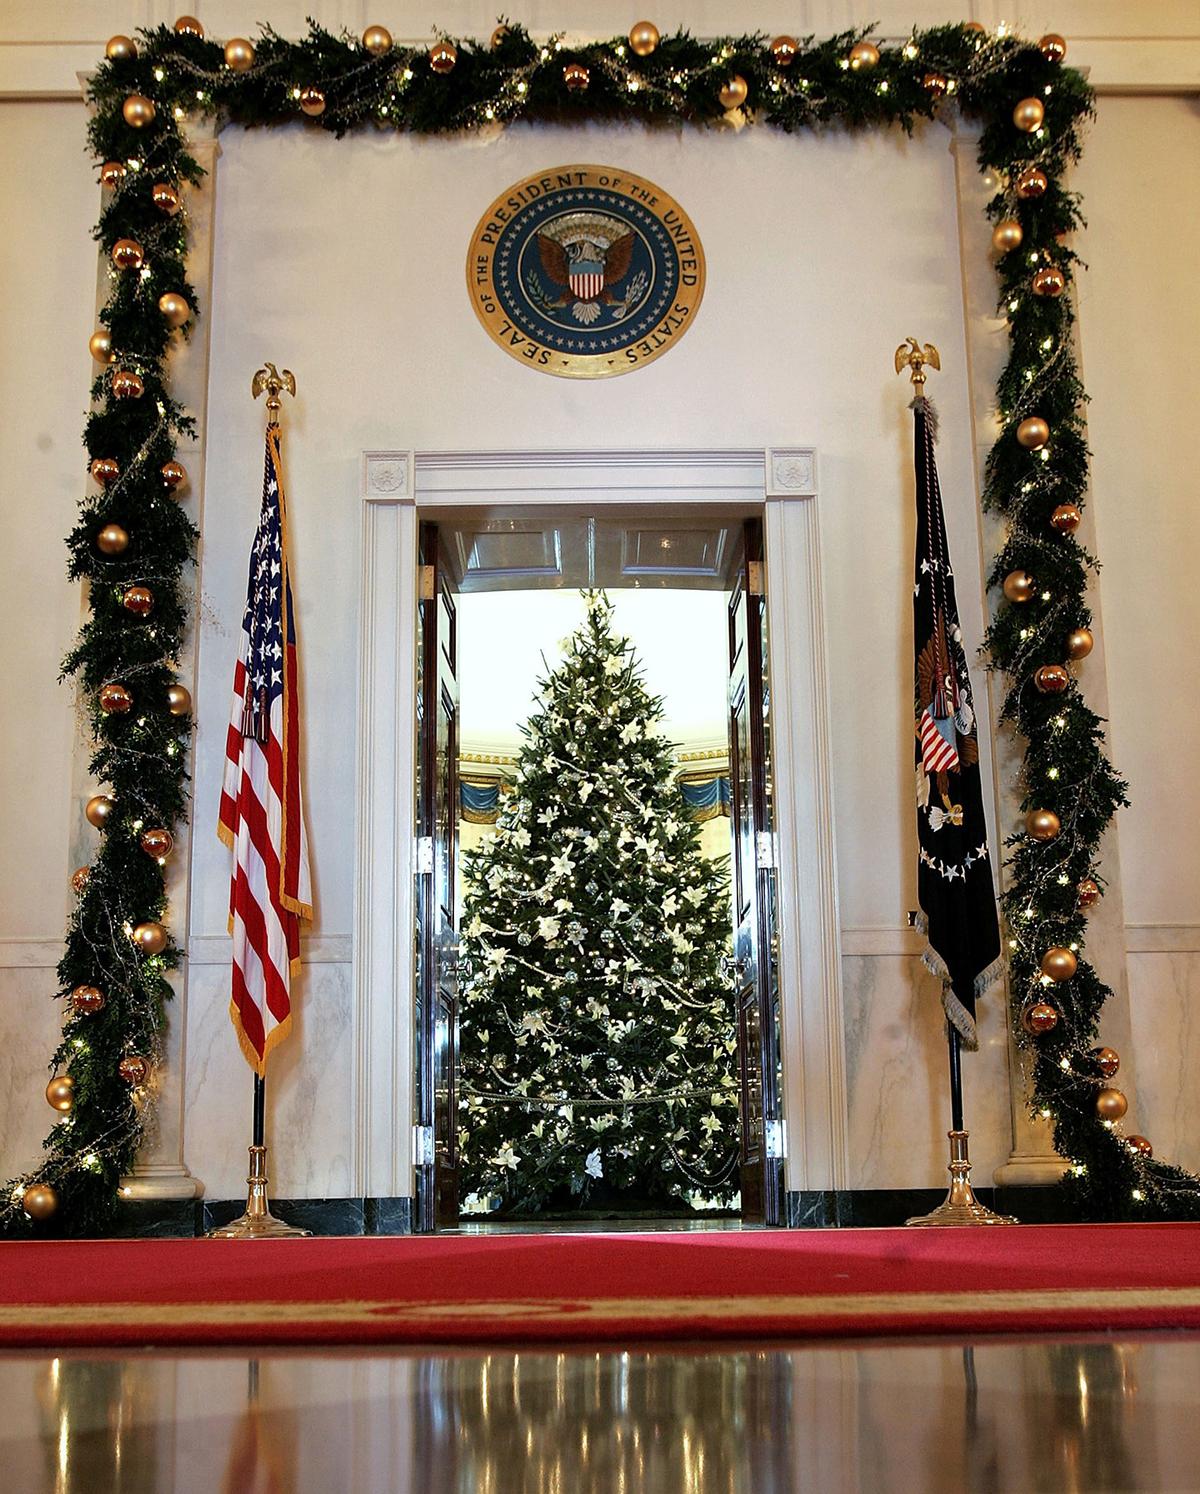 The media preview of the holiday decorations and tasting event in the Blue Room of the White House on Nov. 30, 2005. (Chip Somodevilla/Getty Images)